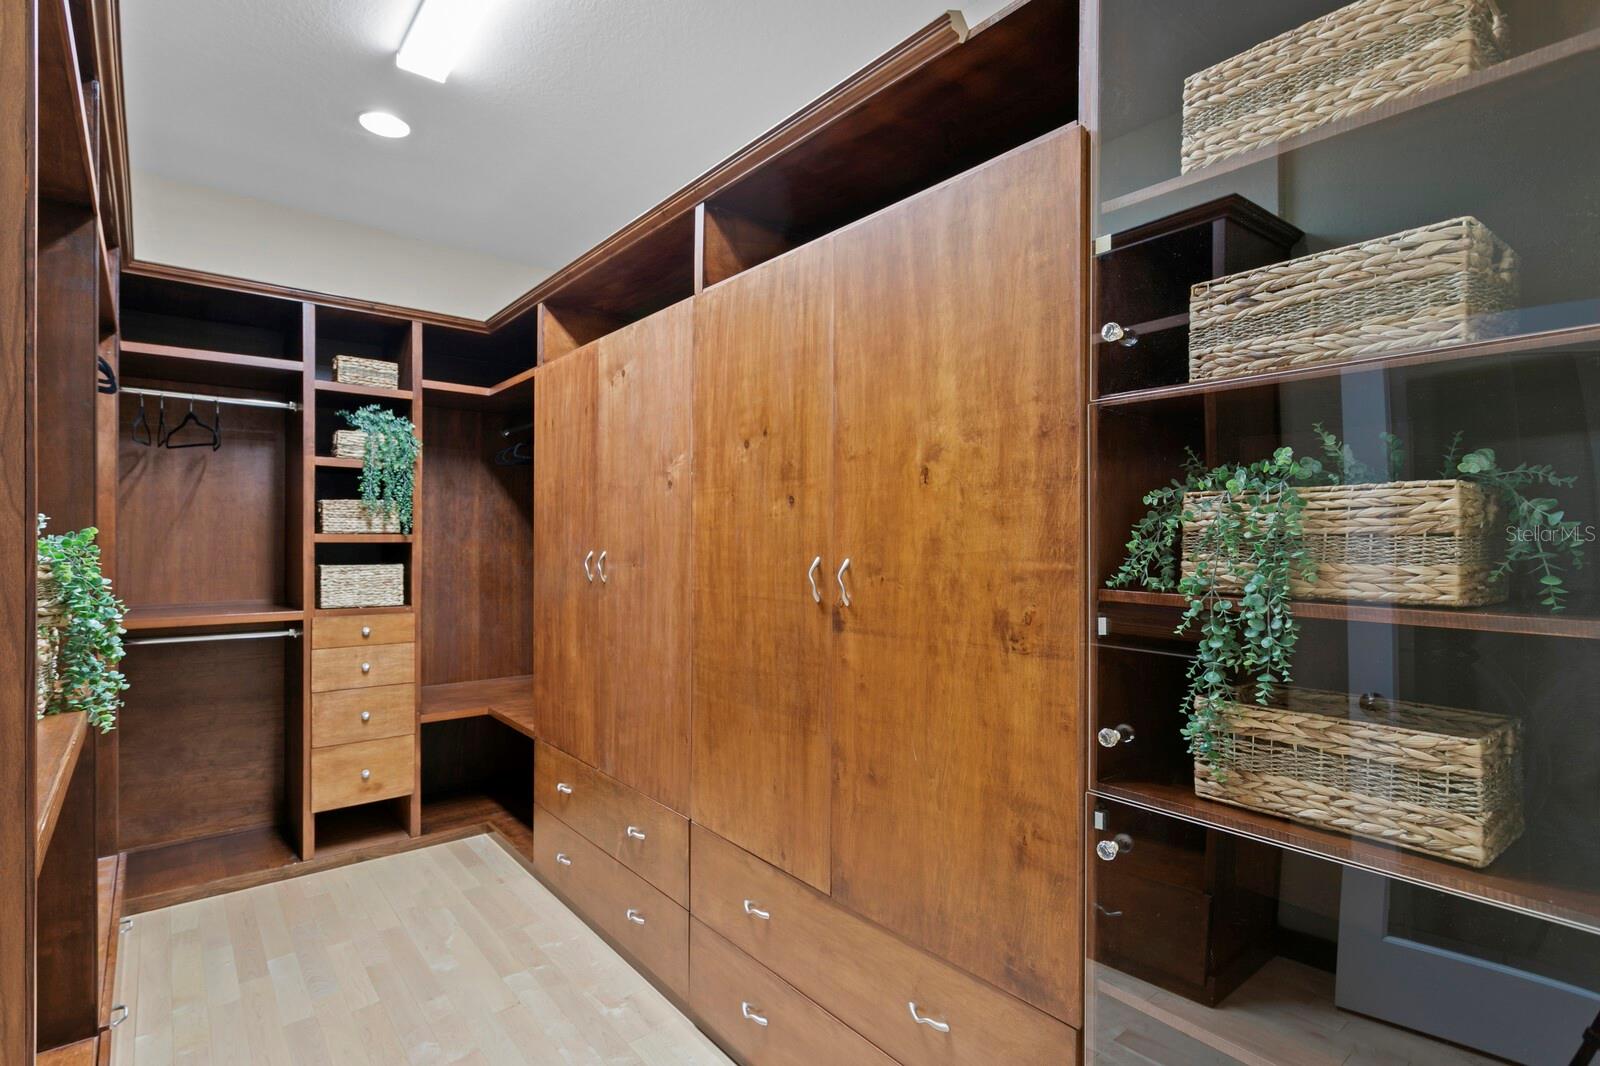 Beautifully finished walk-in-closet in the Owner's Suite